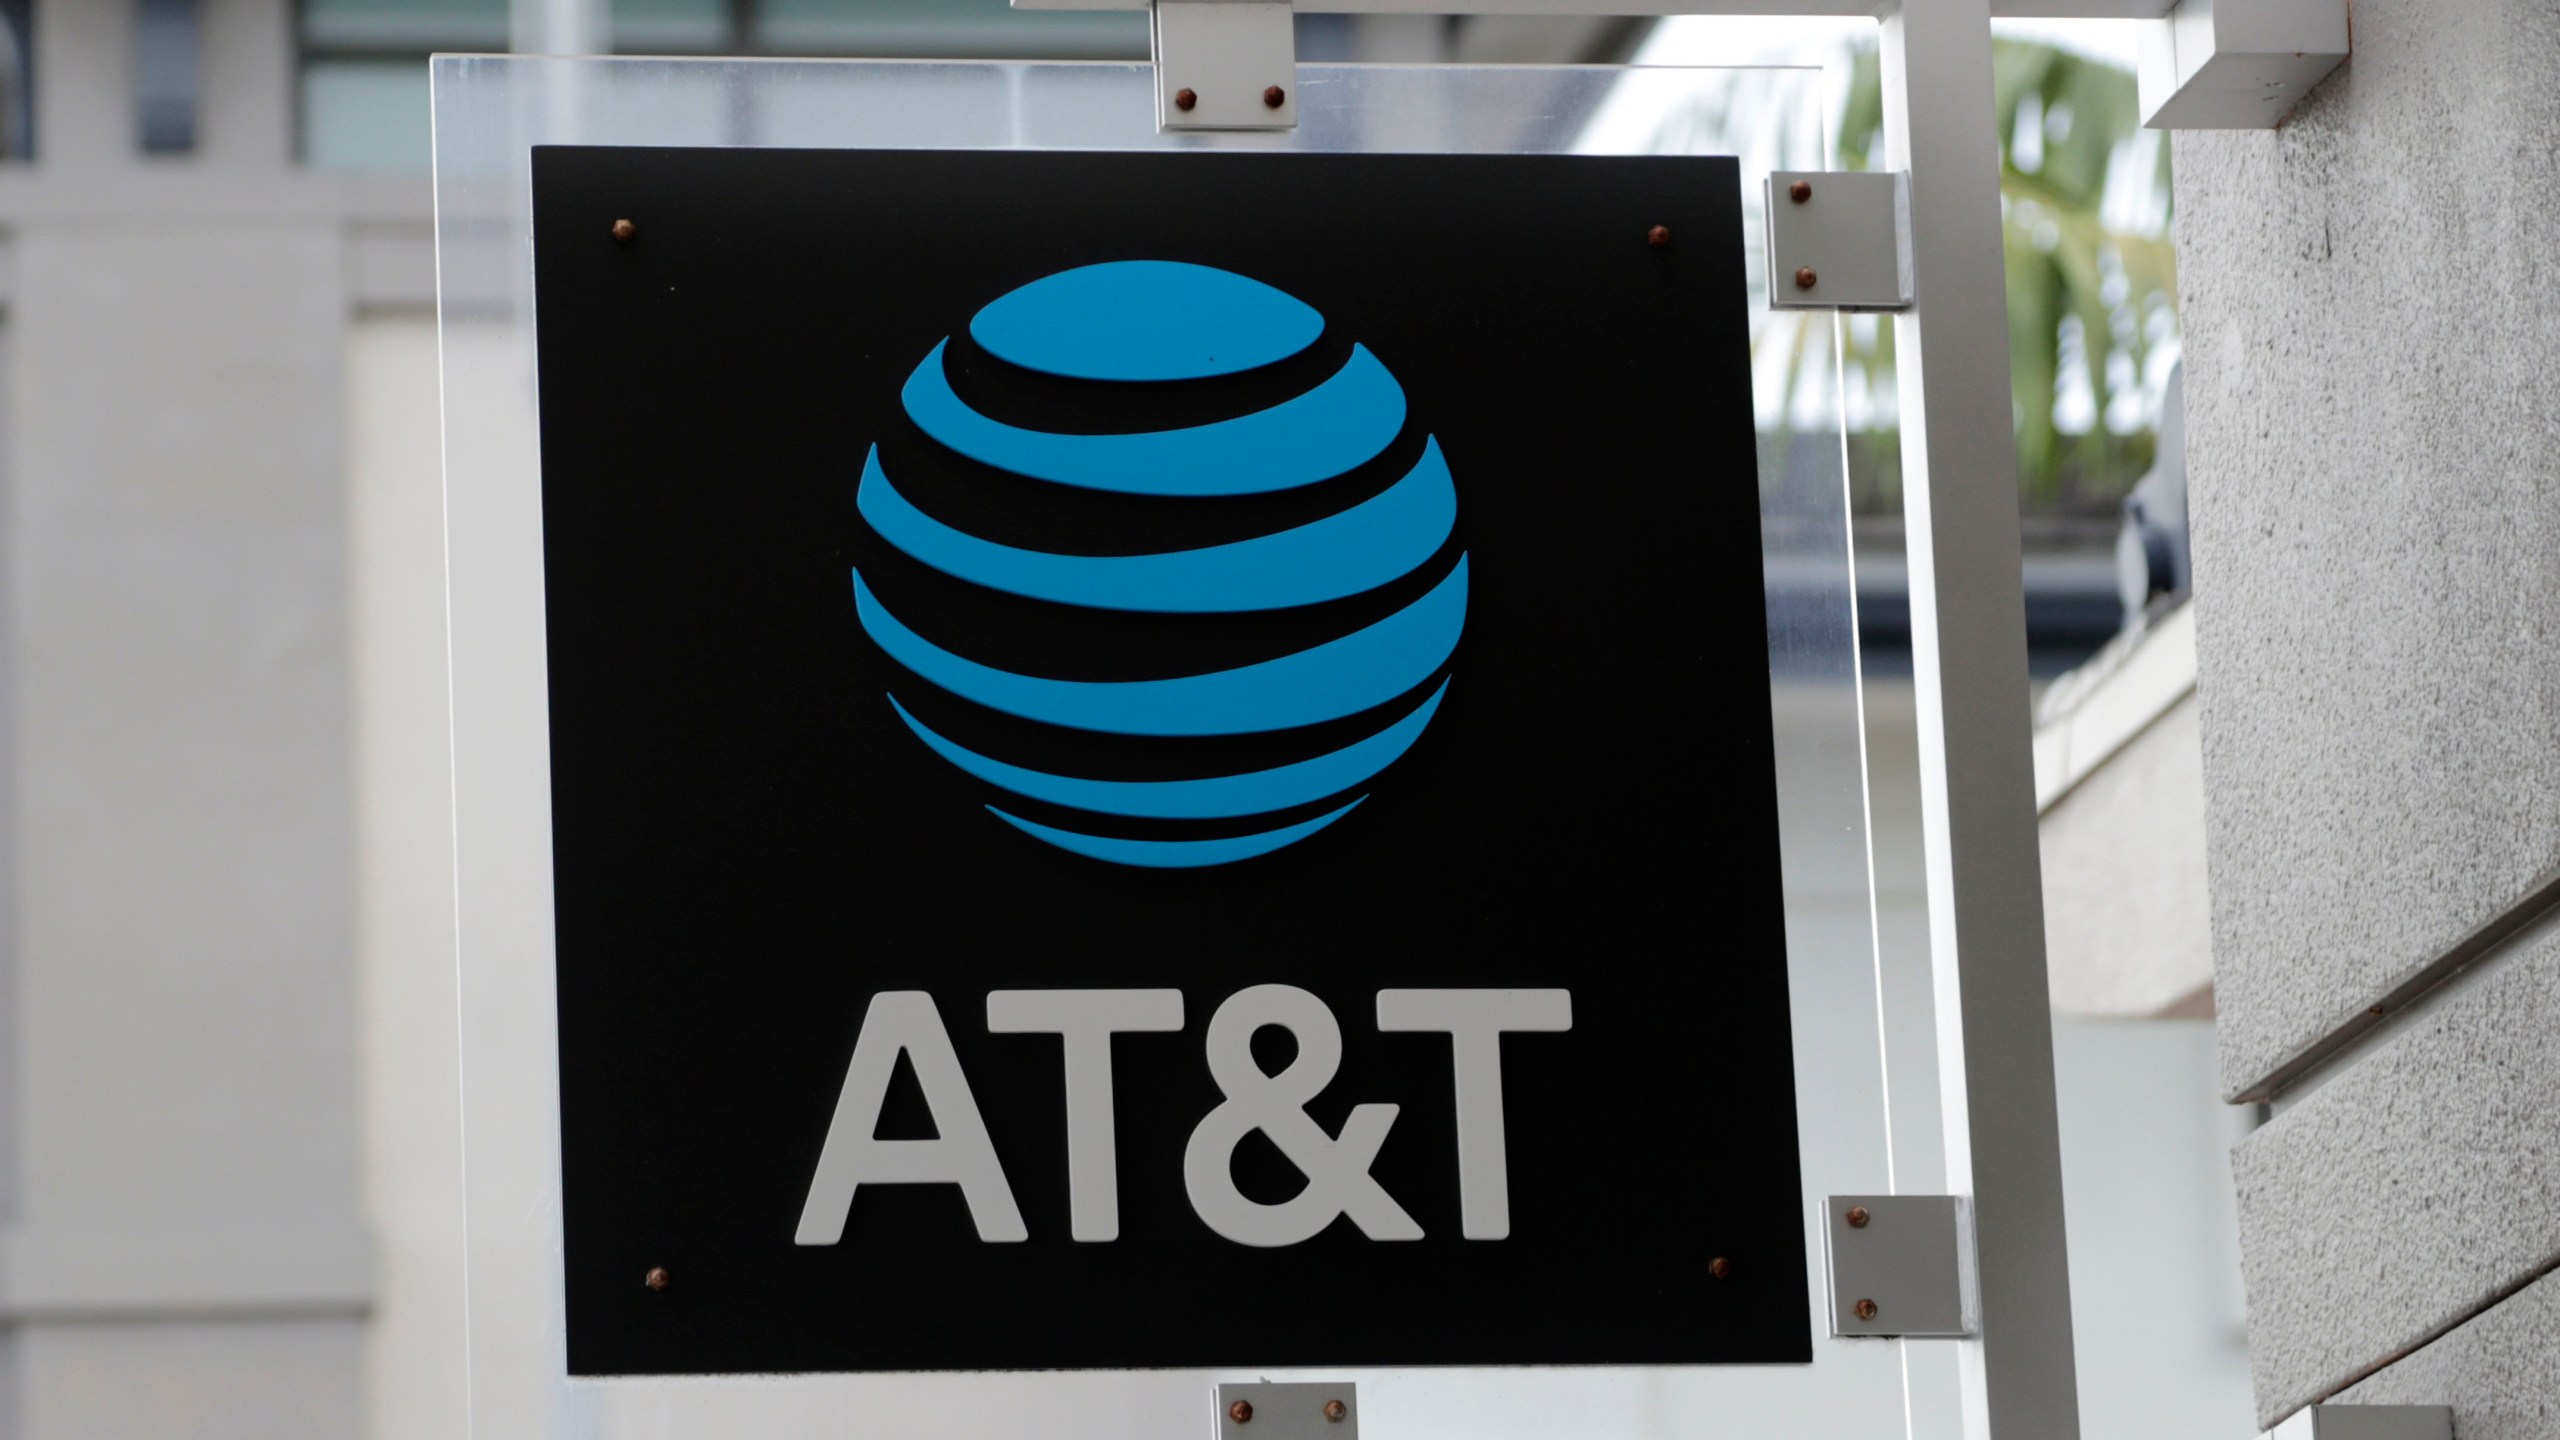 FILE - The sign in front of an AT&T retail store is seen in Miami, July 18, 2019. The theft of sensitive information belonging to millions of AT&T’s current and former customers has been recently discovered online, the telecommunications giant said Saturday, March 30, 2024. In an announcement addressing the data breach, AT&T said that a dataset found on the dark web contains information including some Social Security numbers and passcodes for about 7.6 million current account holders and 65.4 million former account holders. (AP Photo/Lynne Sladky, File)